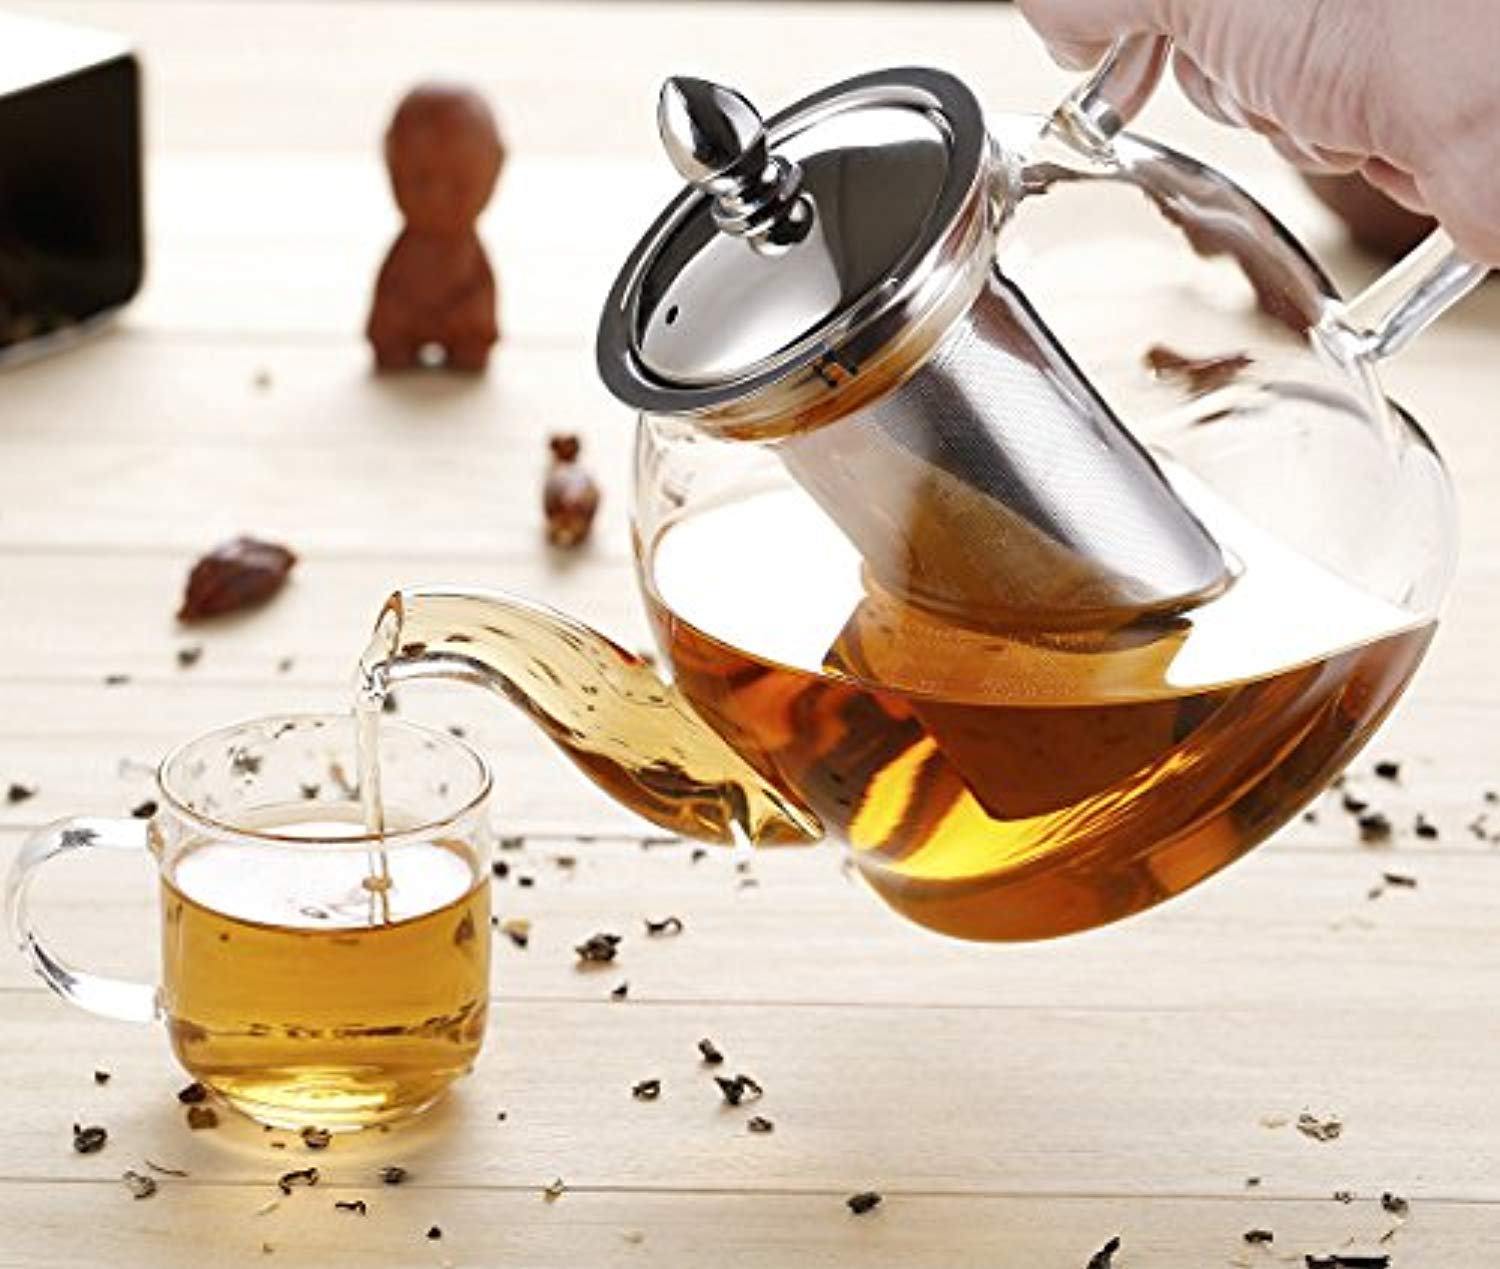 ReaNea 1000ml Glass Teapot with Removable Infuser, Blooming Loose Leaf Tea  Kettle 